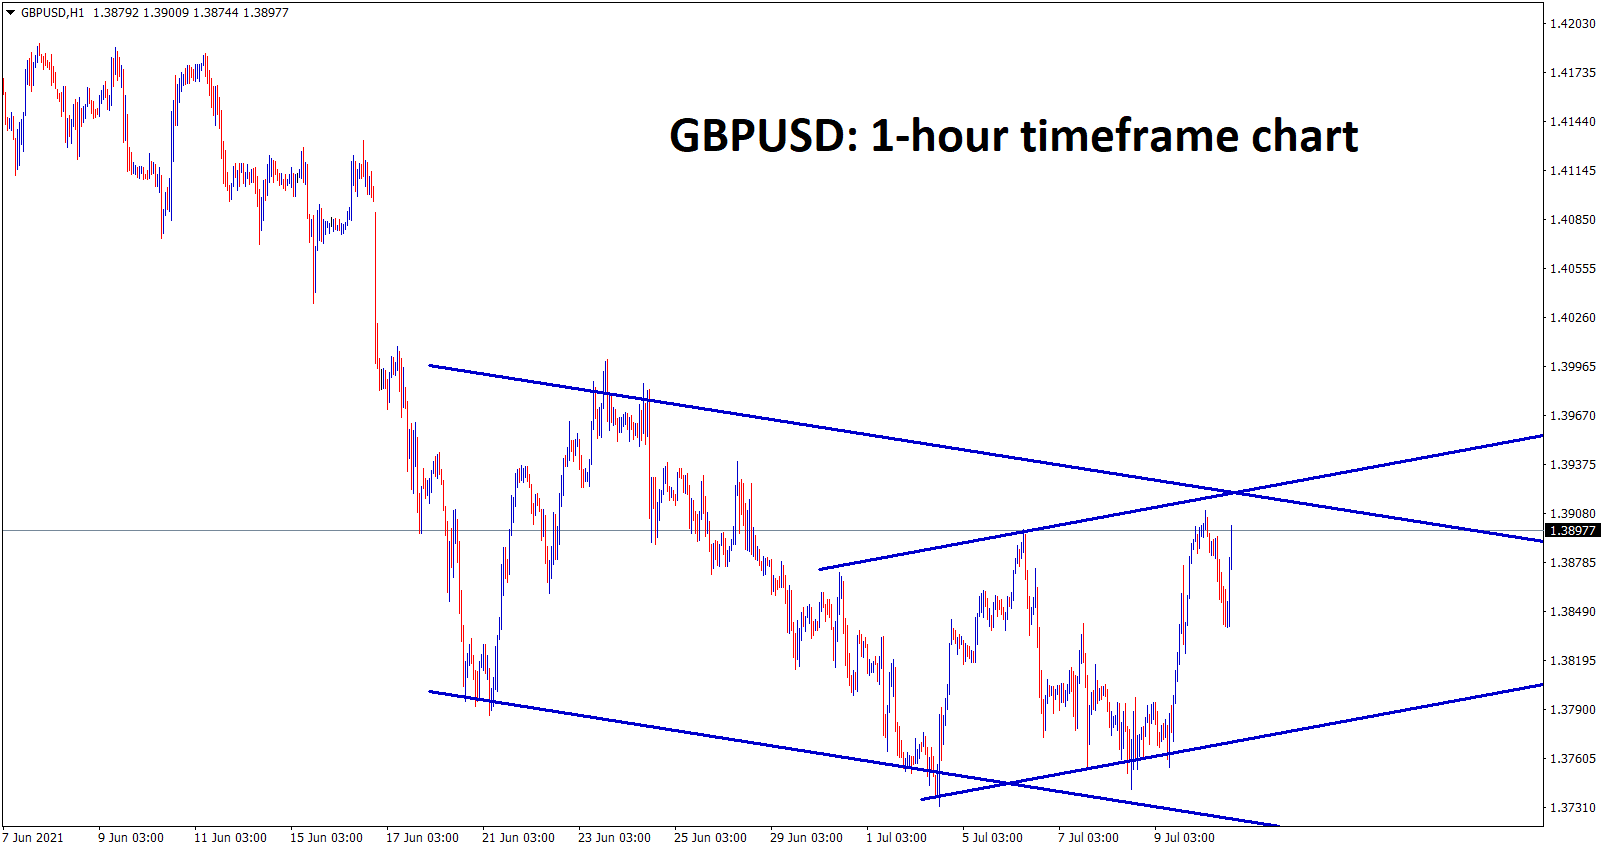 GBPUSD is moving between the channel ranges in the hourly chart